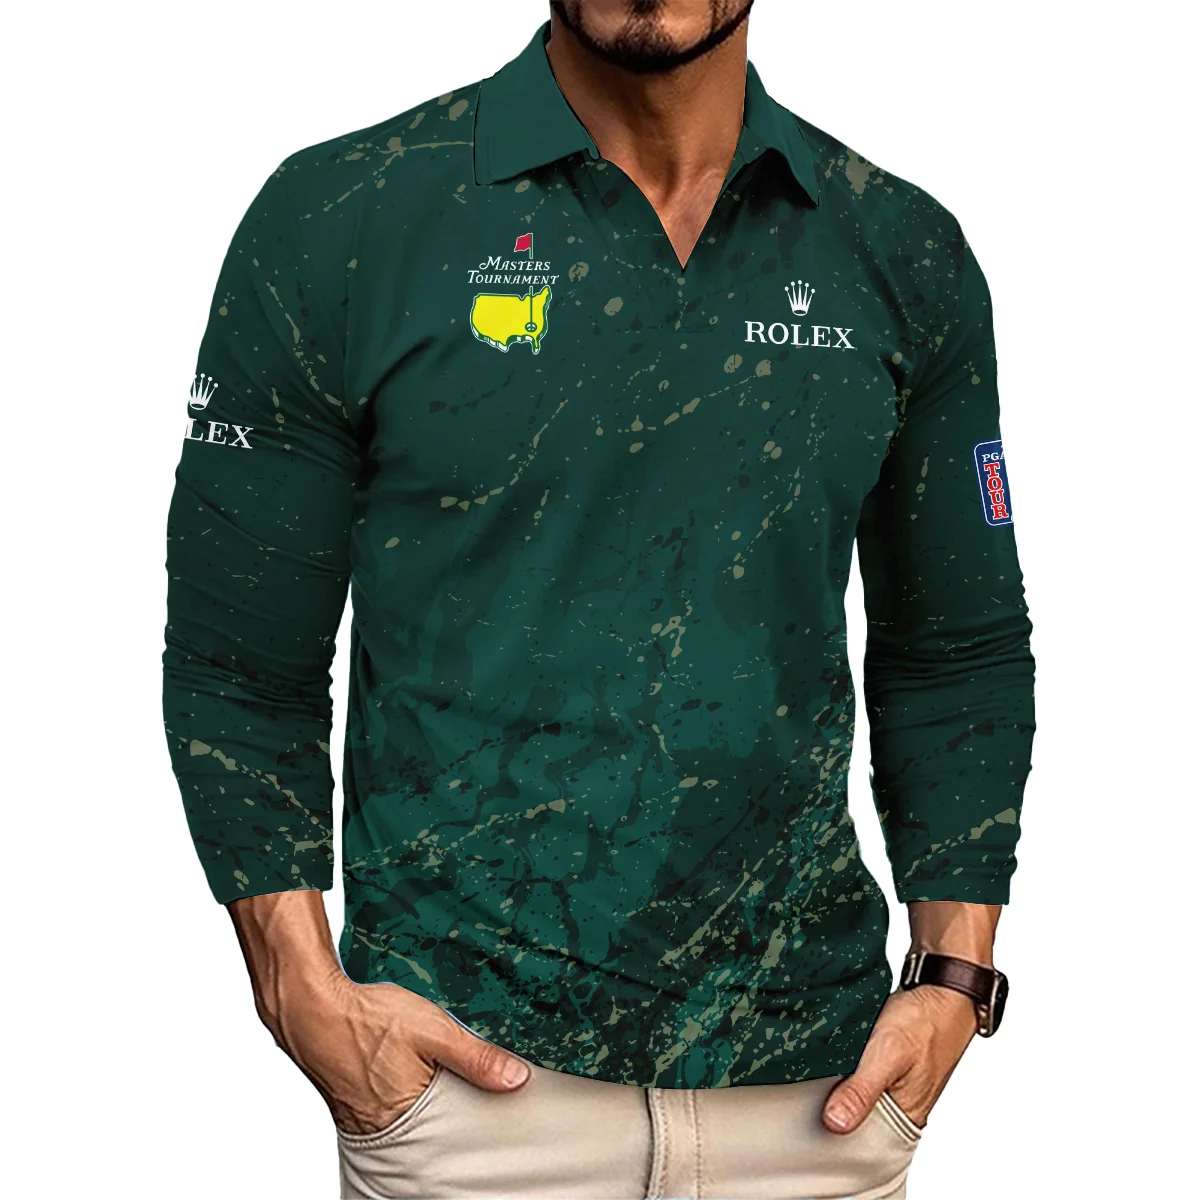 Old Cracked Texture With Gold Splash Paint Masters Tournament Rolex Polo Shirt Style Classic Polo Shirt For Men